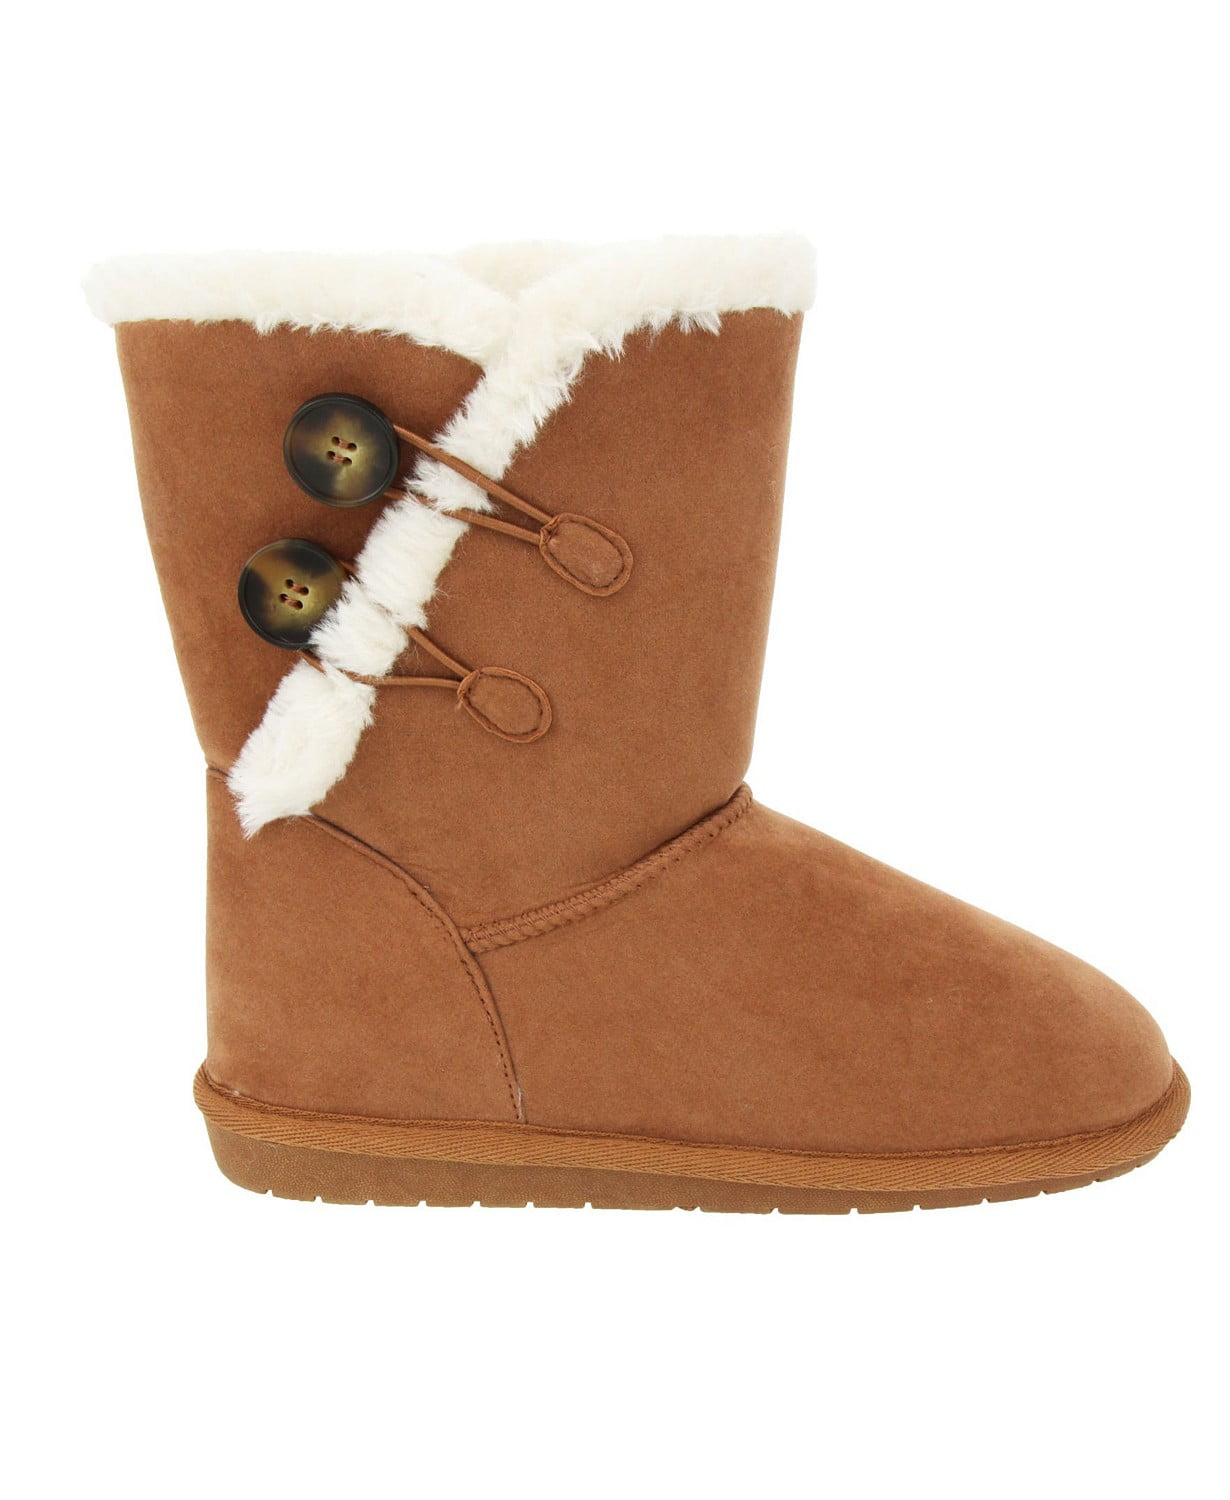 woocommerce-673321-2209615.cloudwaysapps.com-sugar-womens-brown-marty-cozy-winter-boots